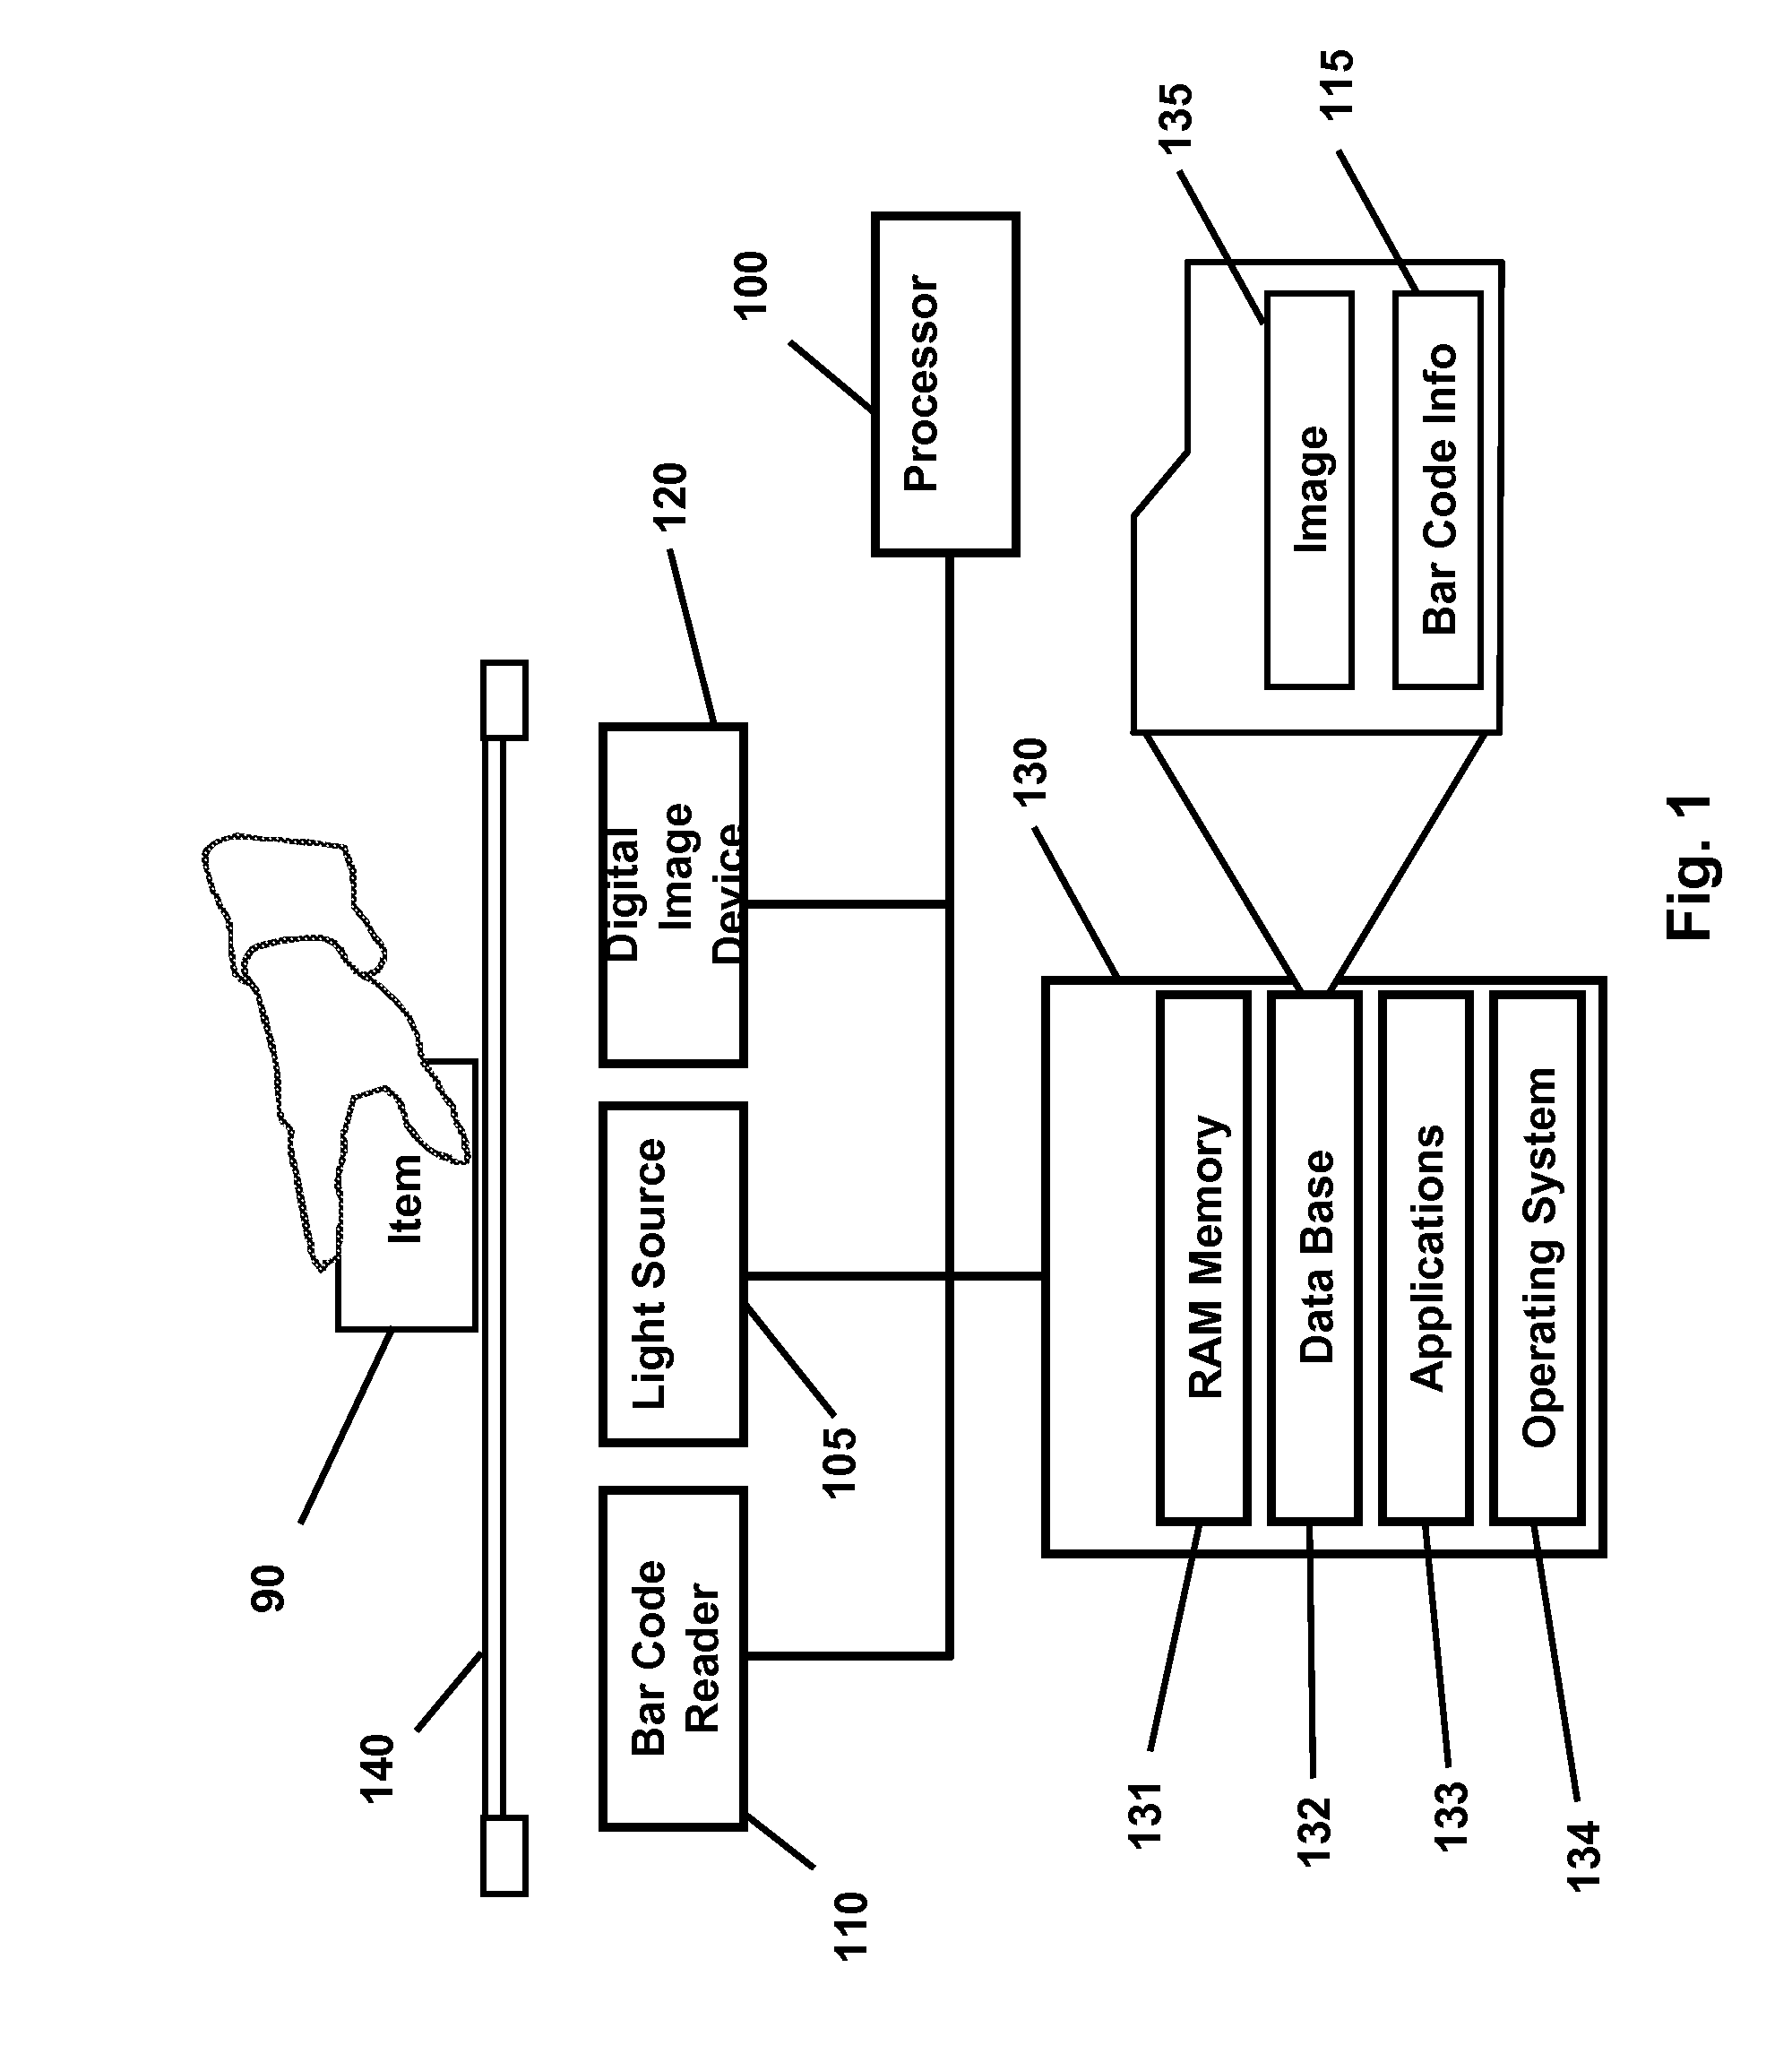 System and method for detecting fraudulent transactions of items having item-identifying indicia